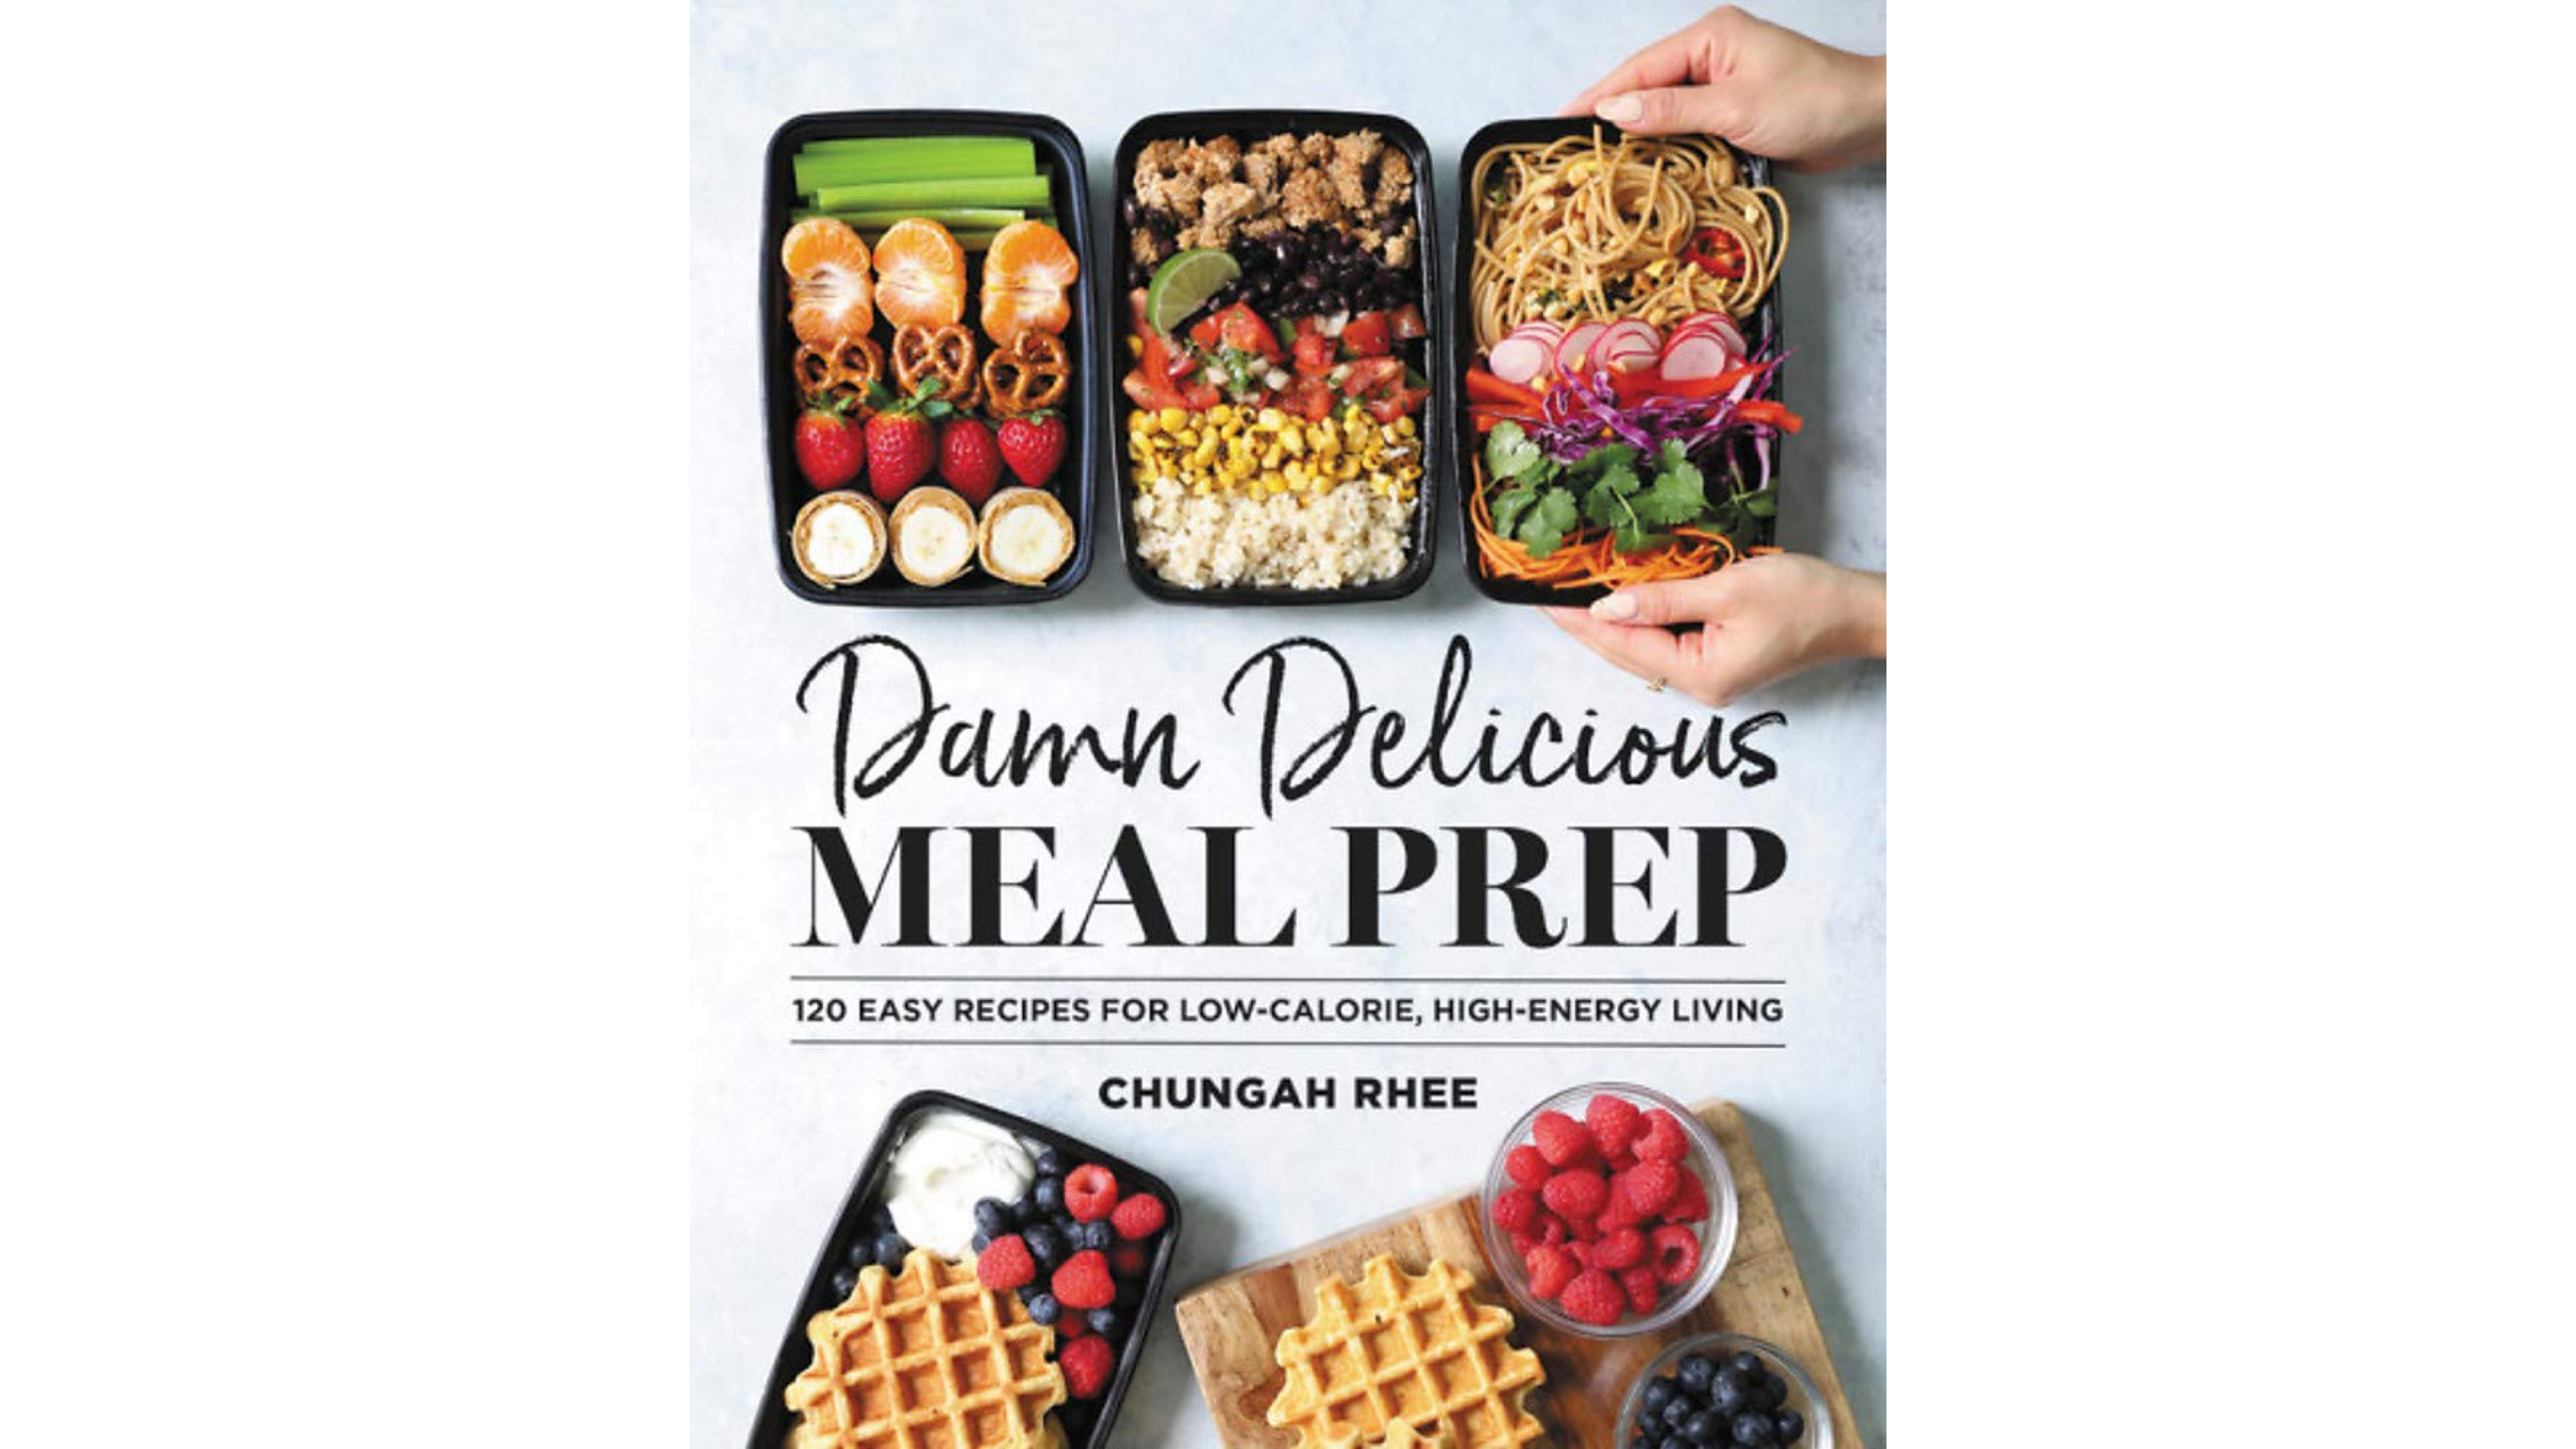 cookbook with tons of recipes to help you meal prep